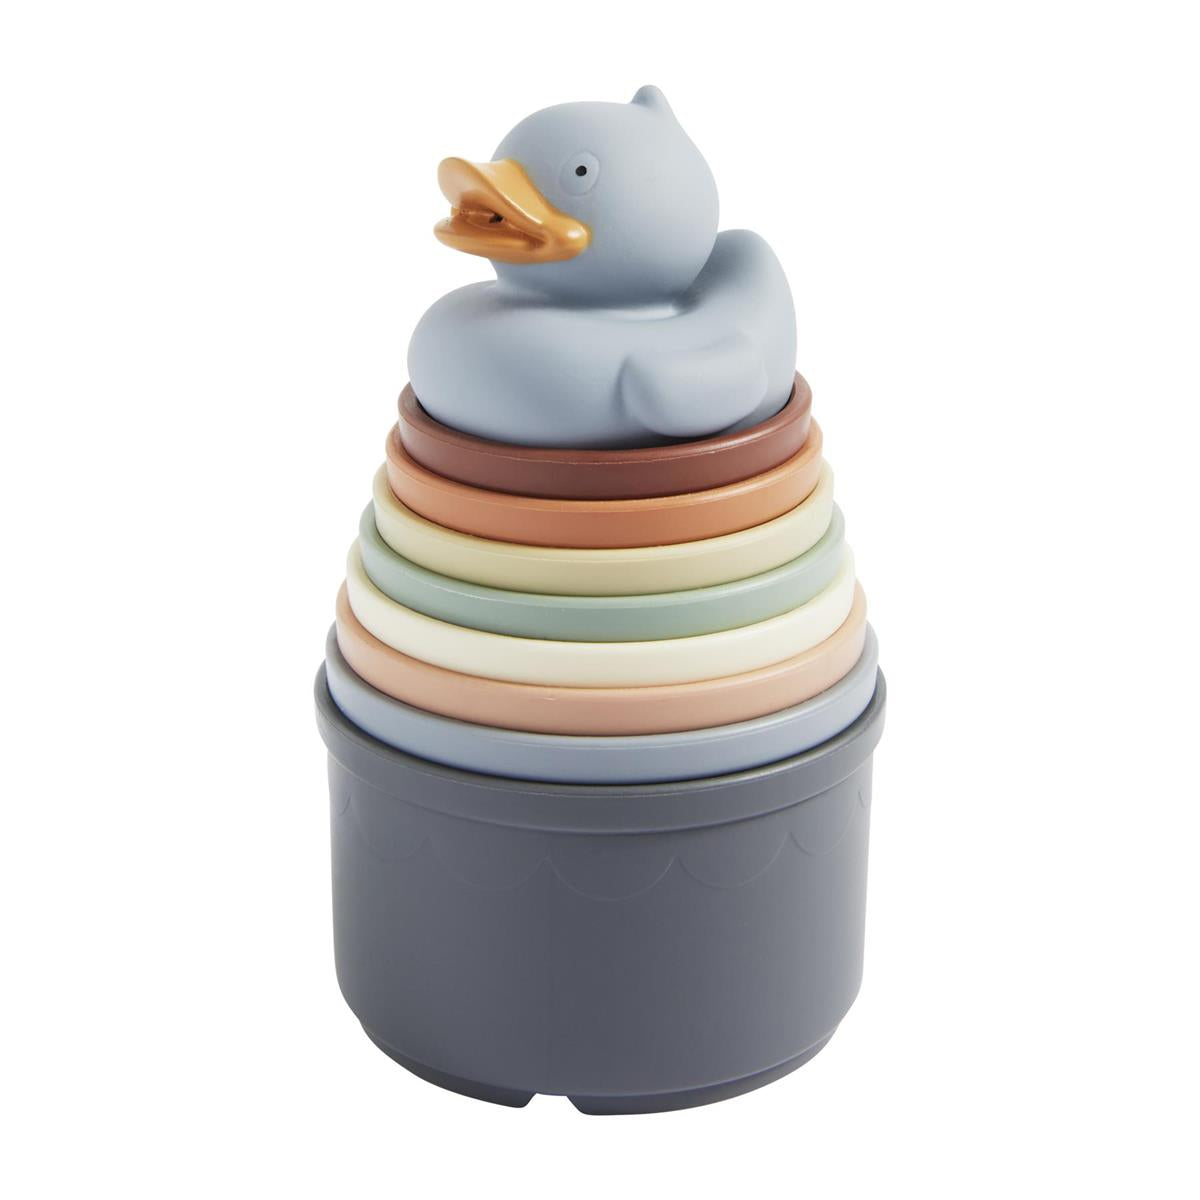 STACKING CUP & DUCK SETS